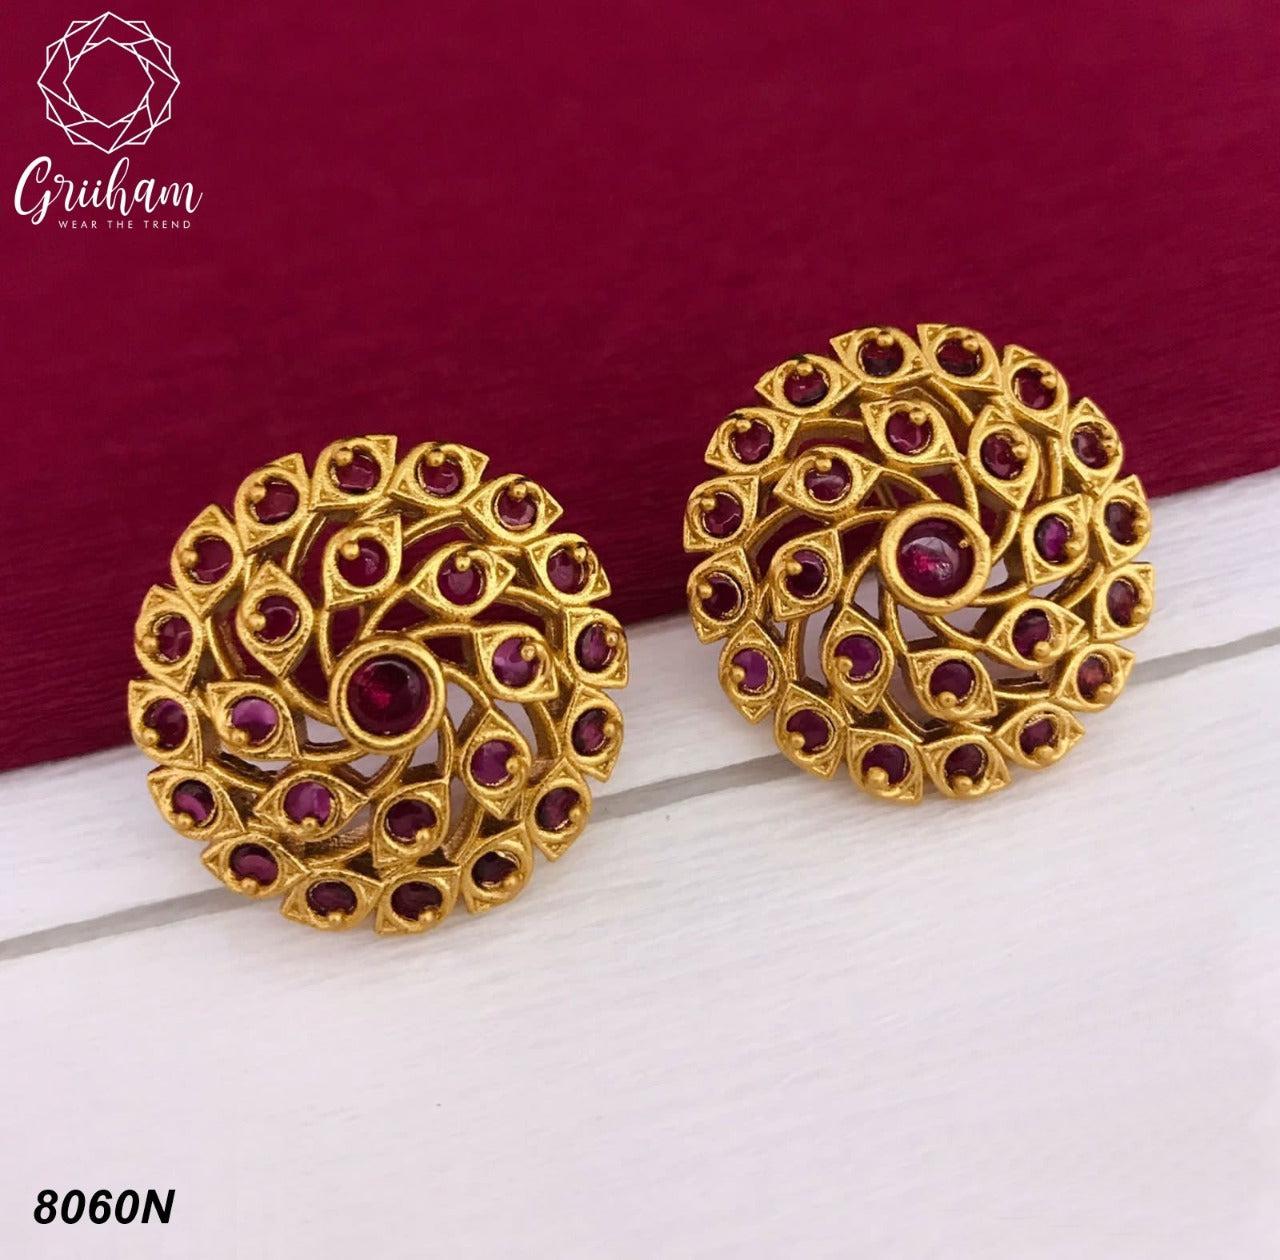 Micro Gold Finish Party Wear Earring / Jhumkas with AD stones 8060N-Jhumkas & Earrings-Griiham-Griiham